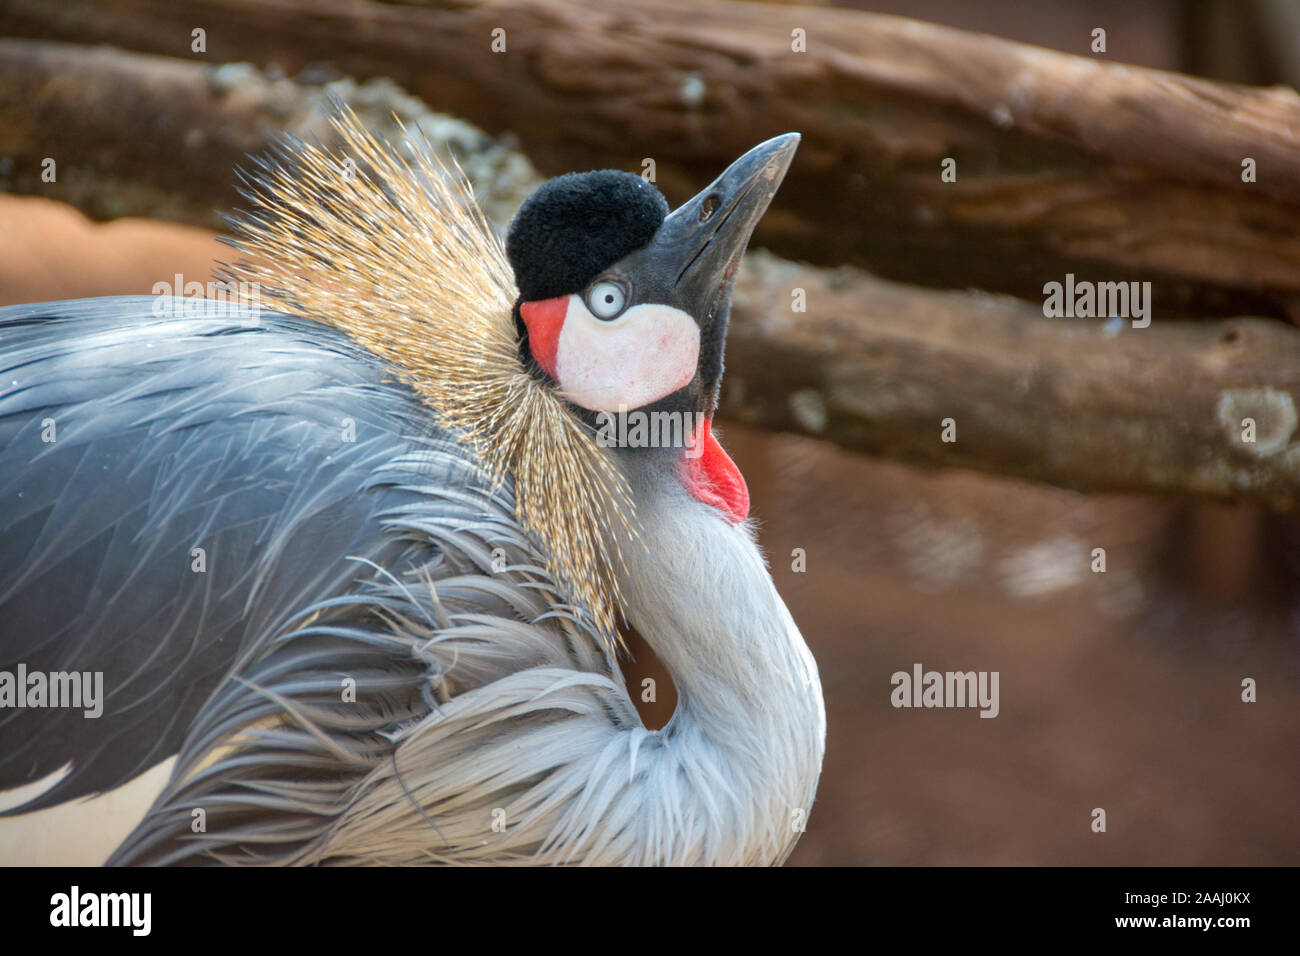 A grey Crowned crane in the Nairobi National Park conservation center. Stock Photo